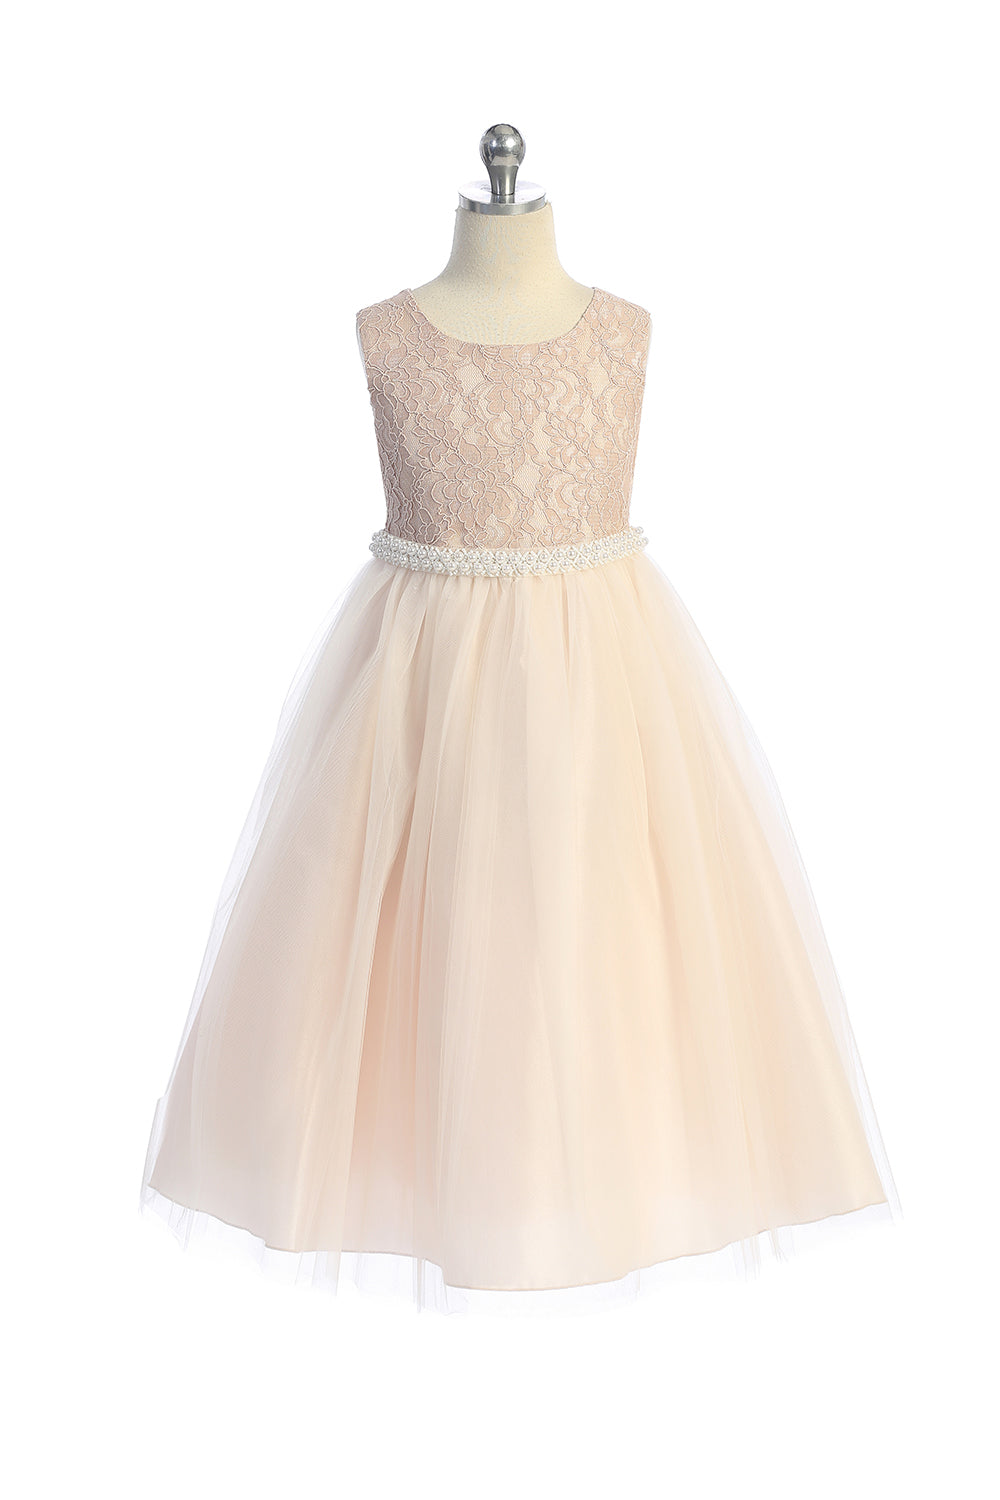 Long Lace Illusion with Thick Pearl Trim Girl Party Dress by AS524C Kids Dream - Girl Formal Dresses